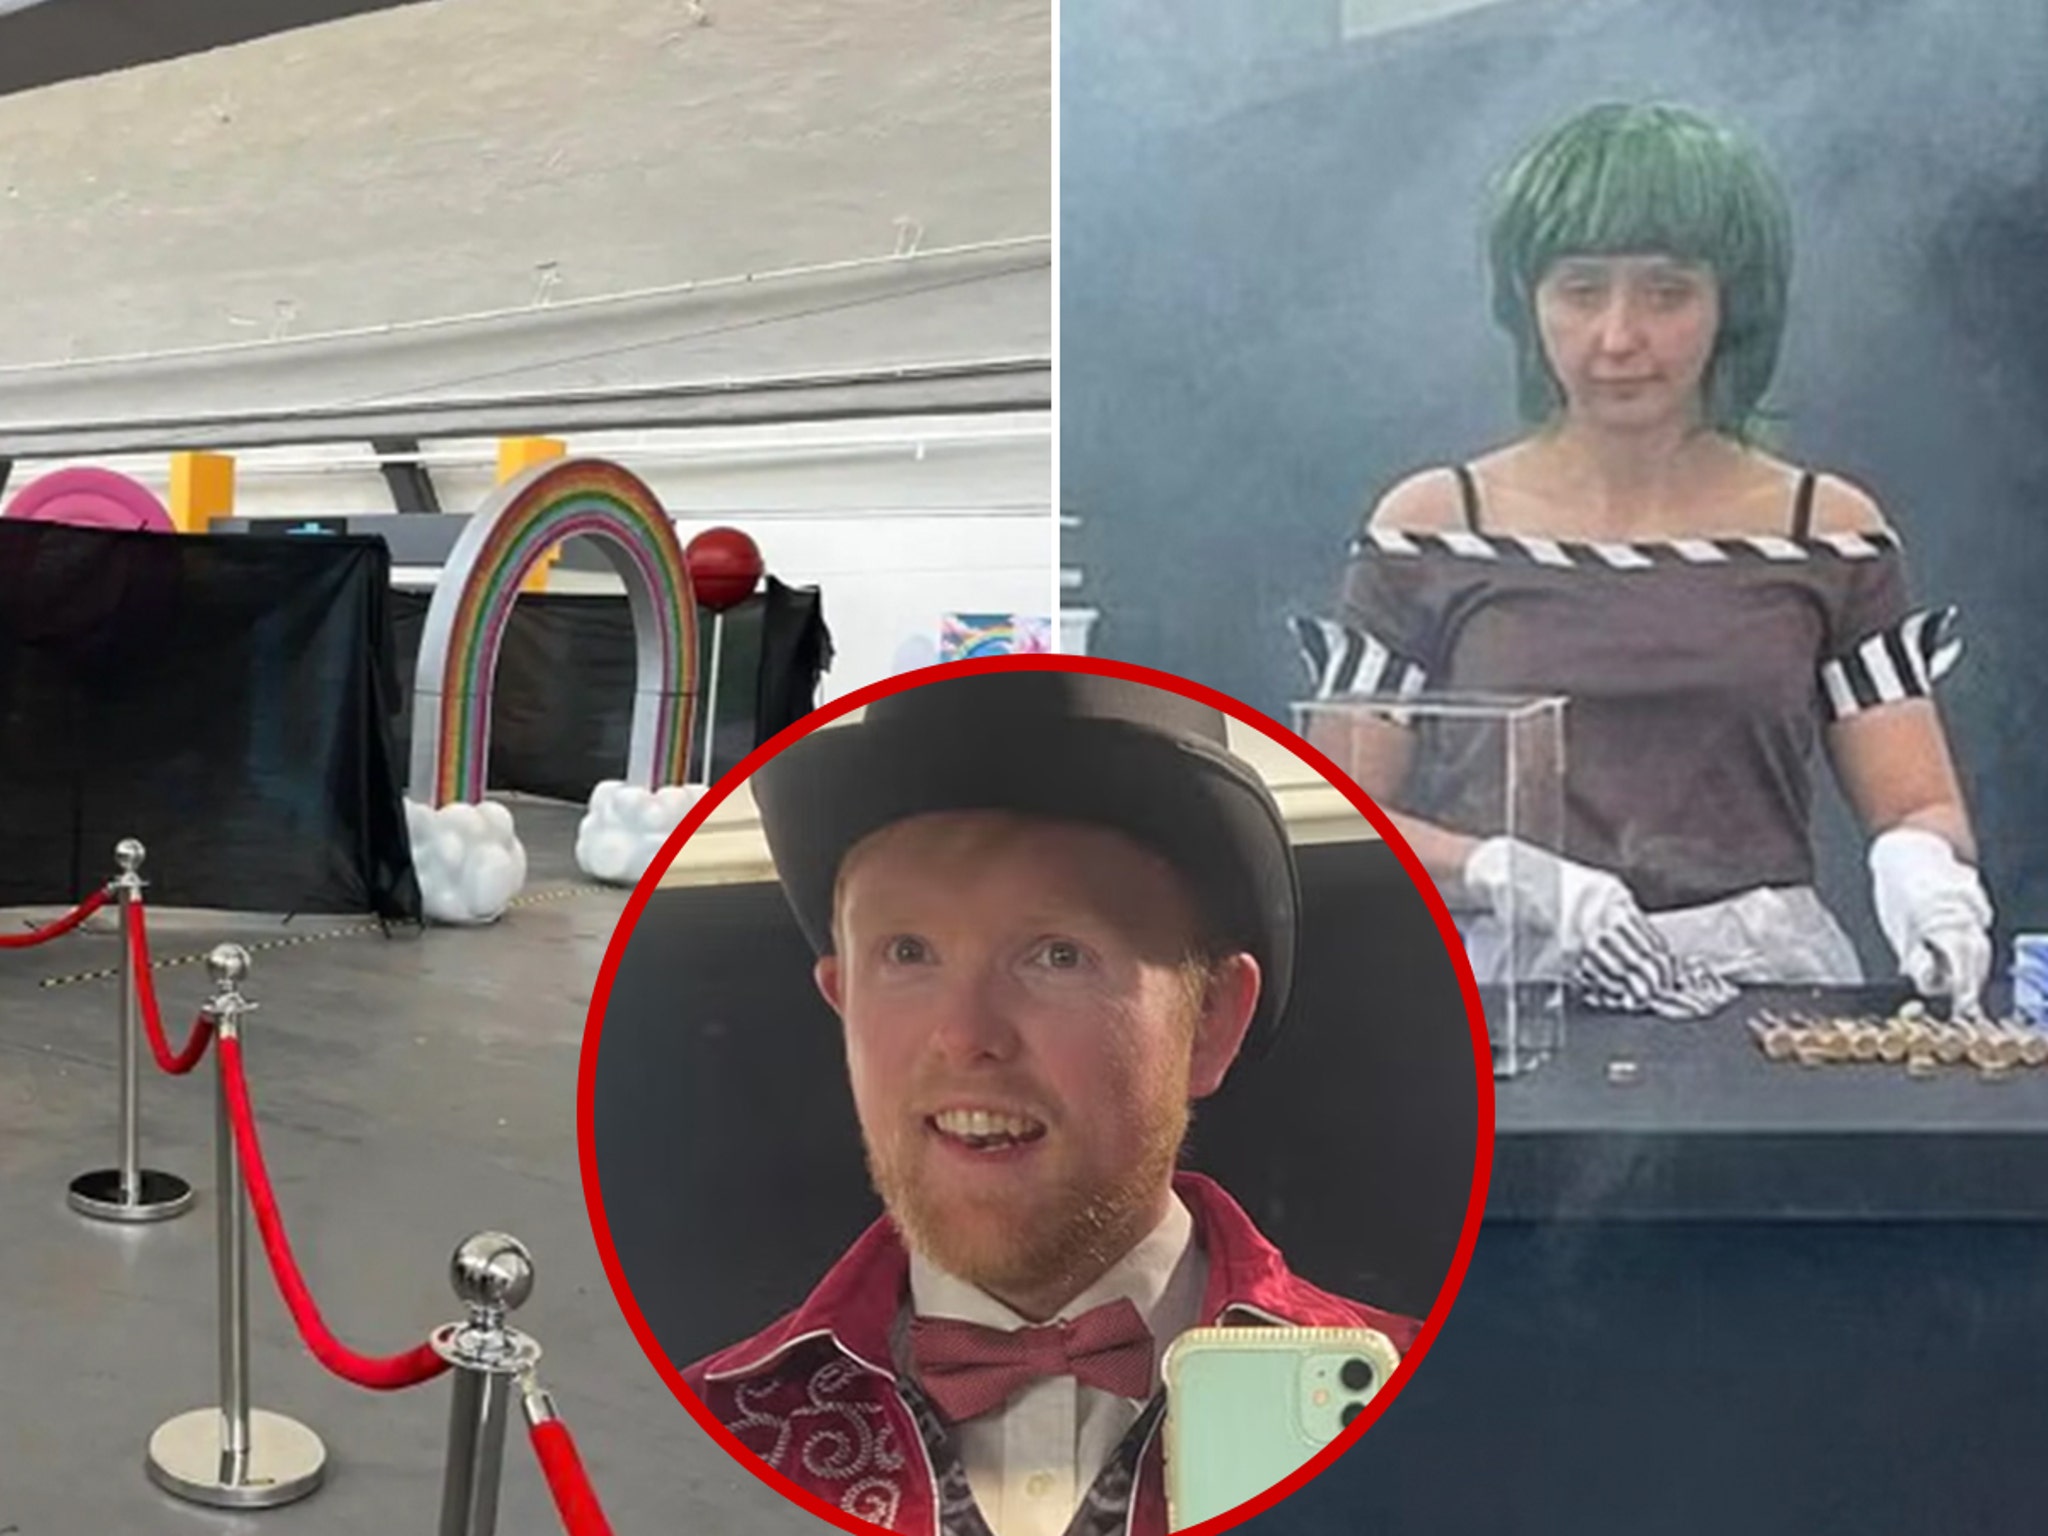 Actor from Glasgow's disastrous Willy Wonka experience reveals the